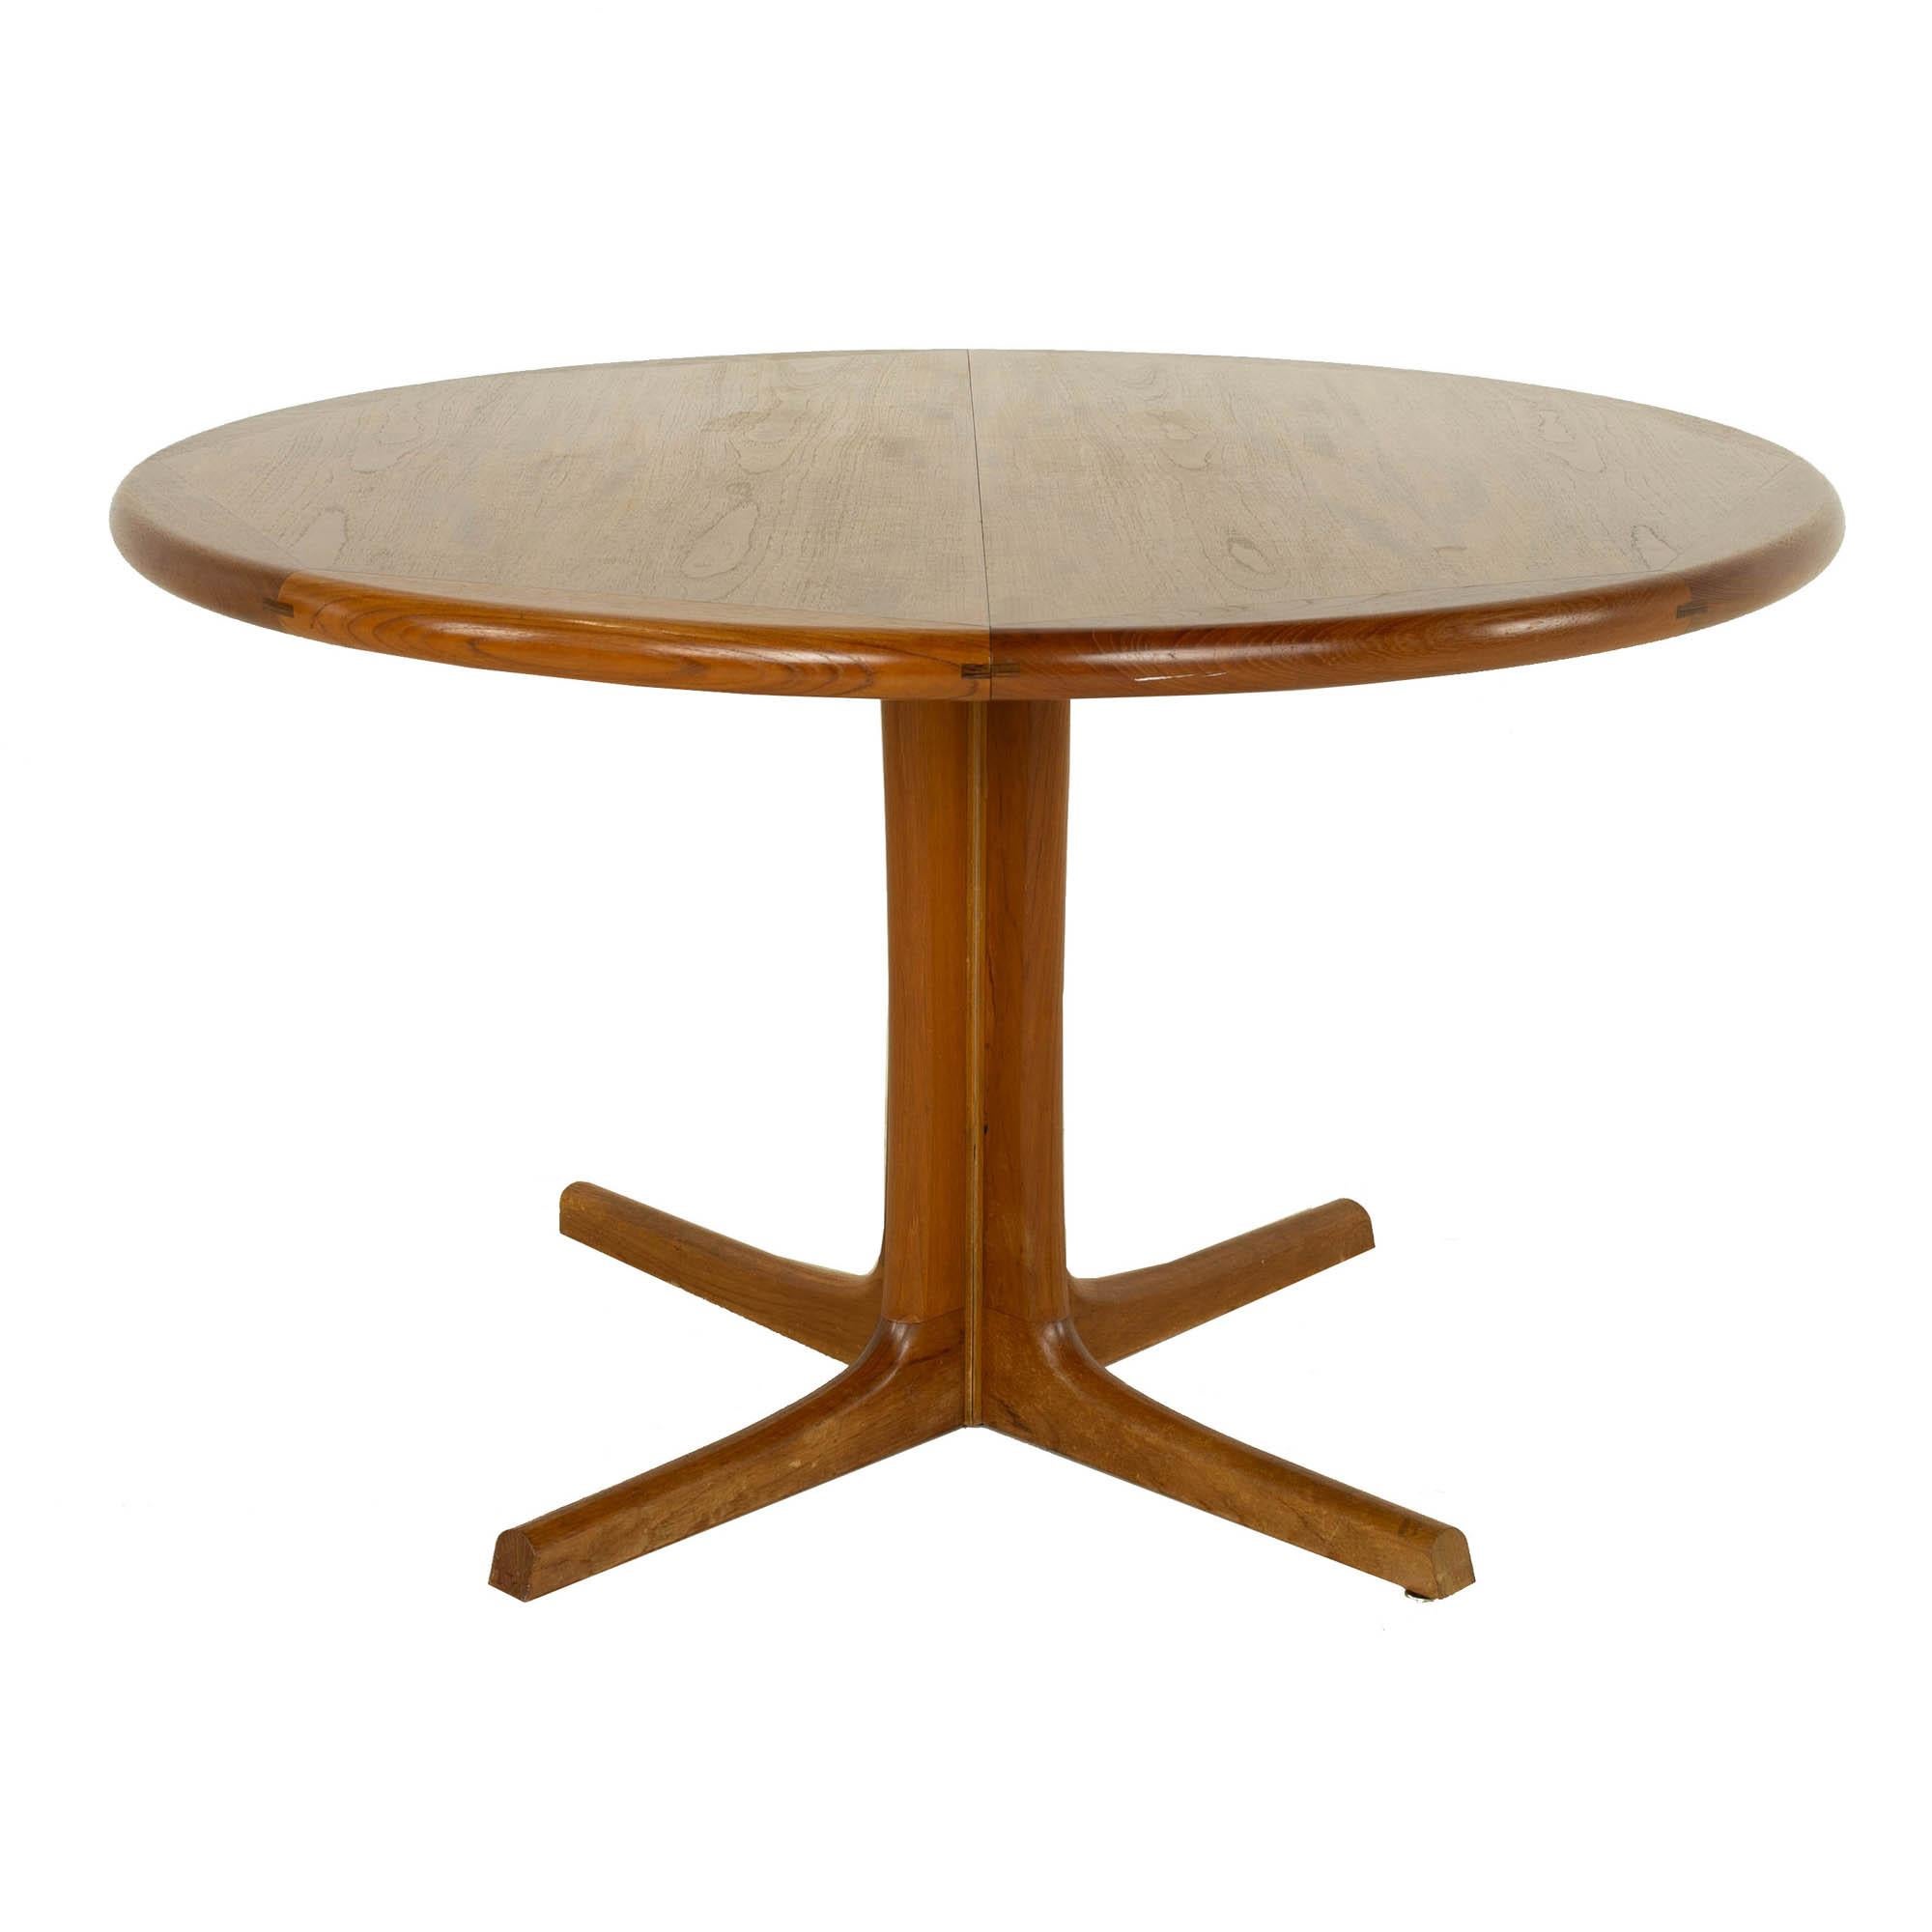 D-Scan mid century teak round dining table - 2 leaves

This table measures: 47.75 wide x 47.75 deep x 28.5 inches high, with a chair clearance of 26.75 inches, each leaf is 19.75 wide making the table 87.25 inches wide

All pieces of furniture